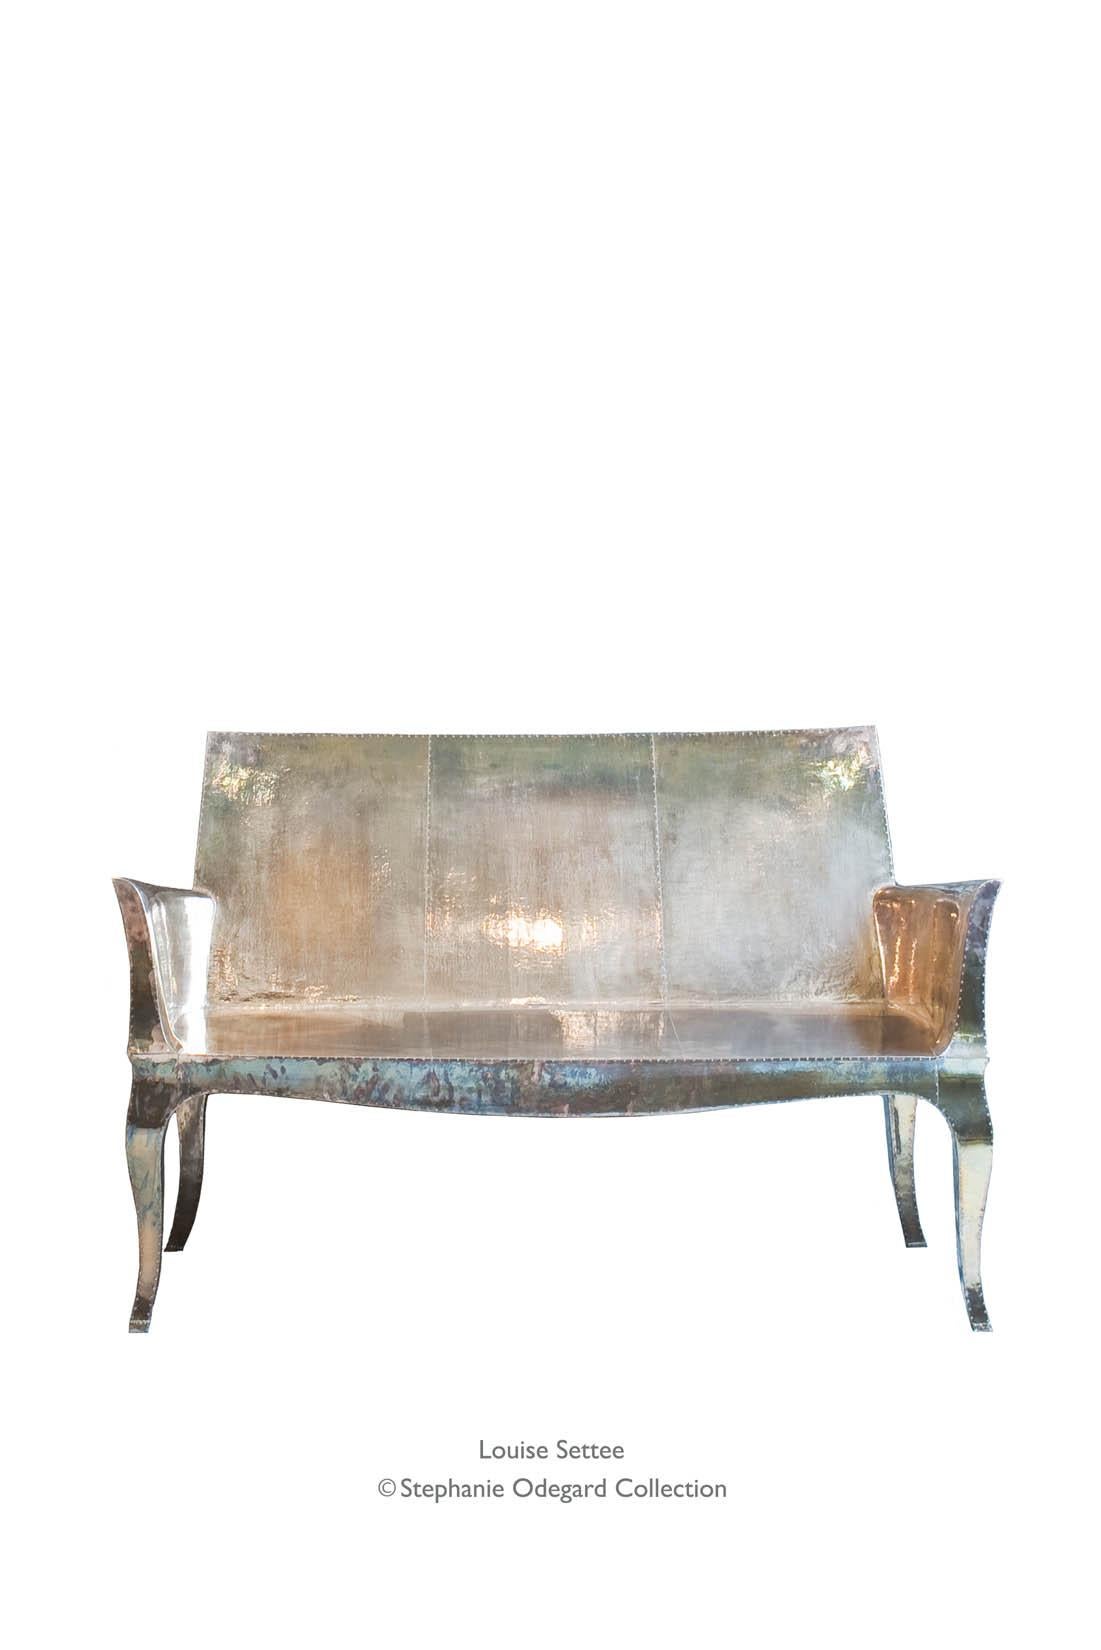 Louise Settee Art Deco Benches in Fine Hammered Antique Bronze by Paul Mathieu For Sale 6